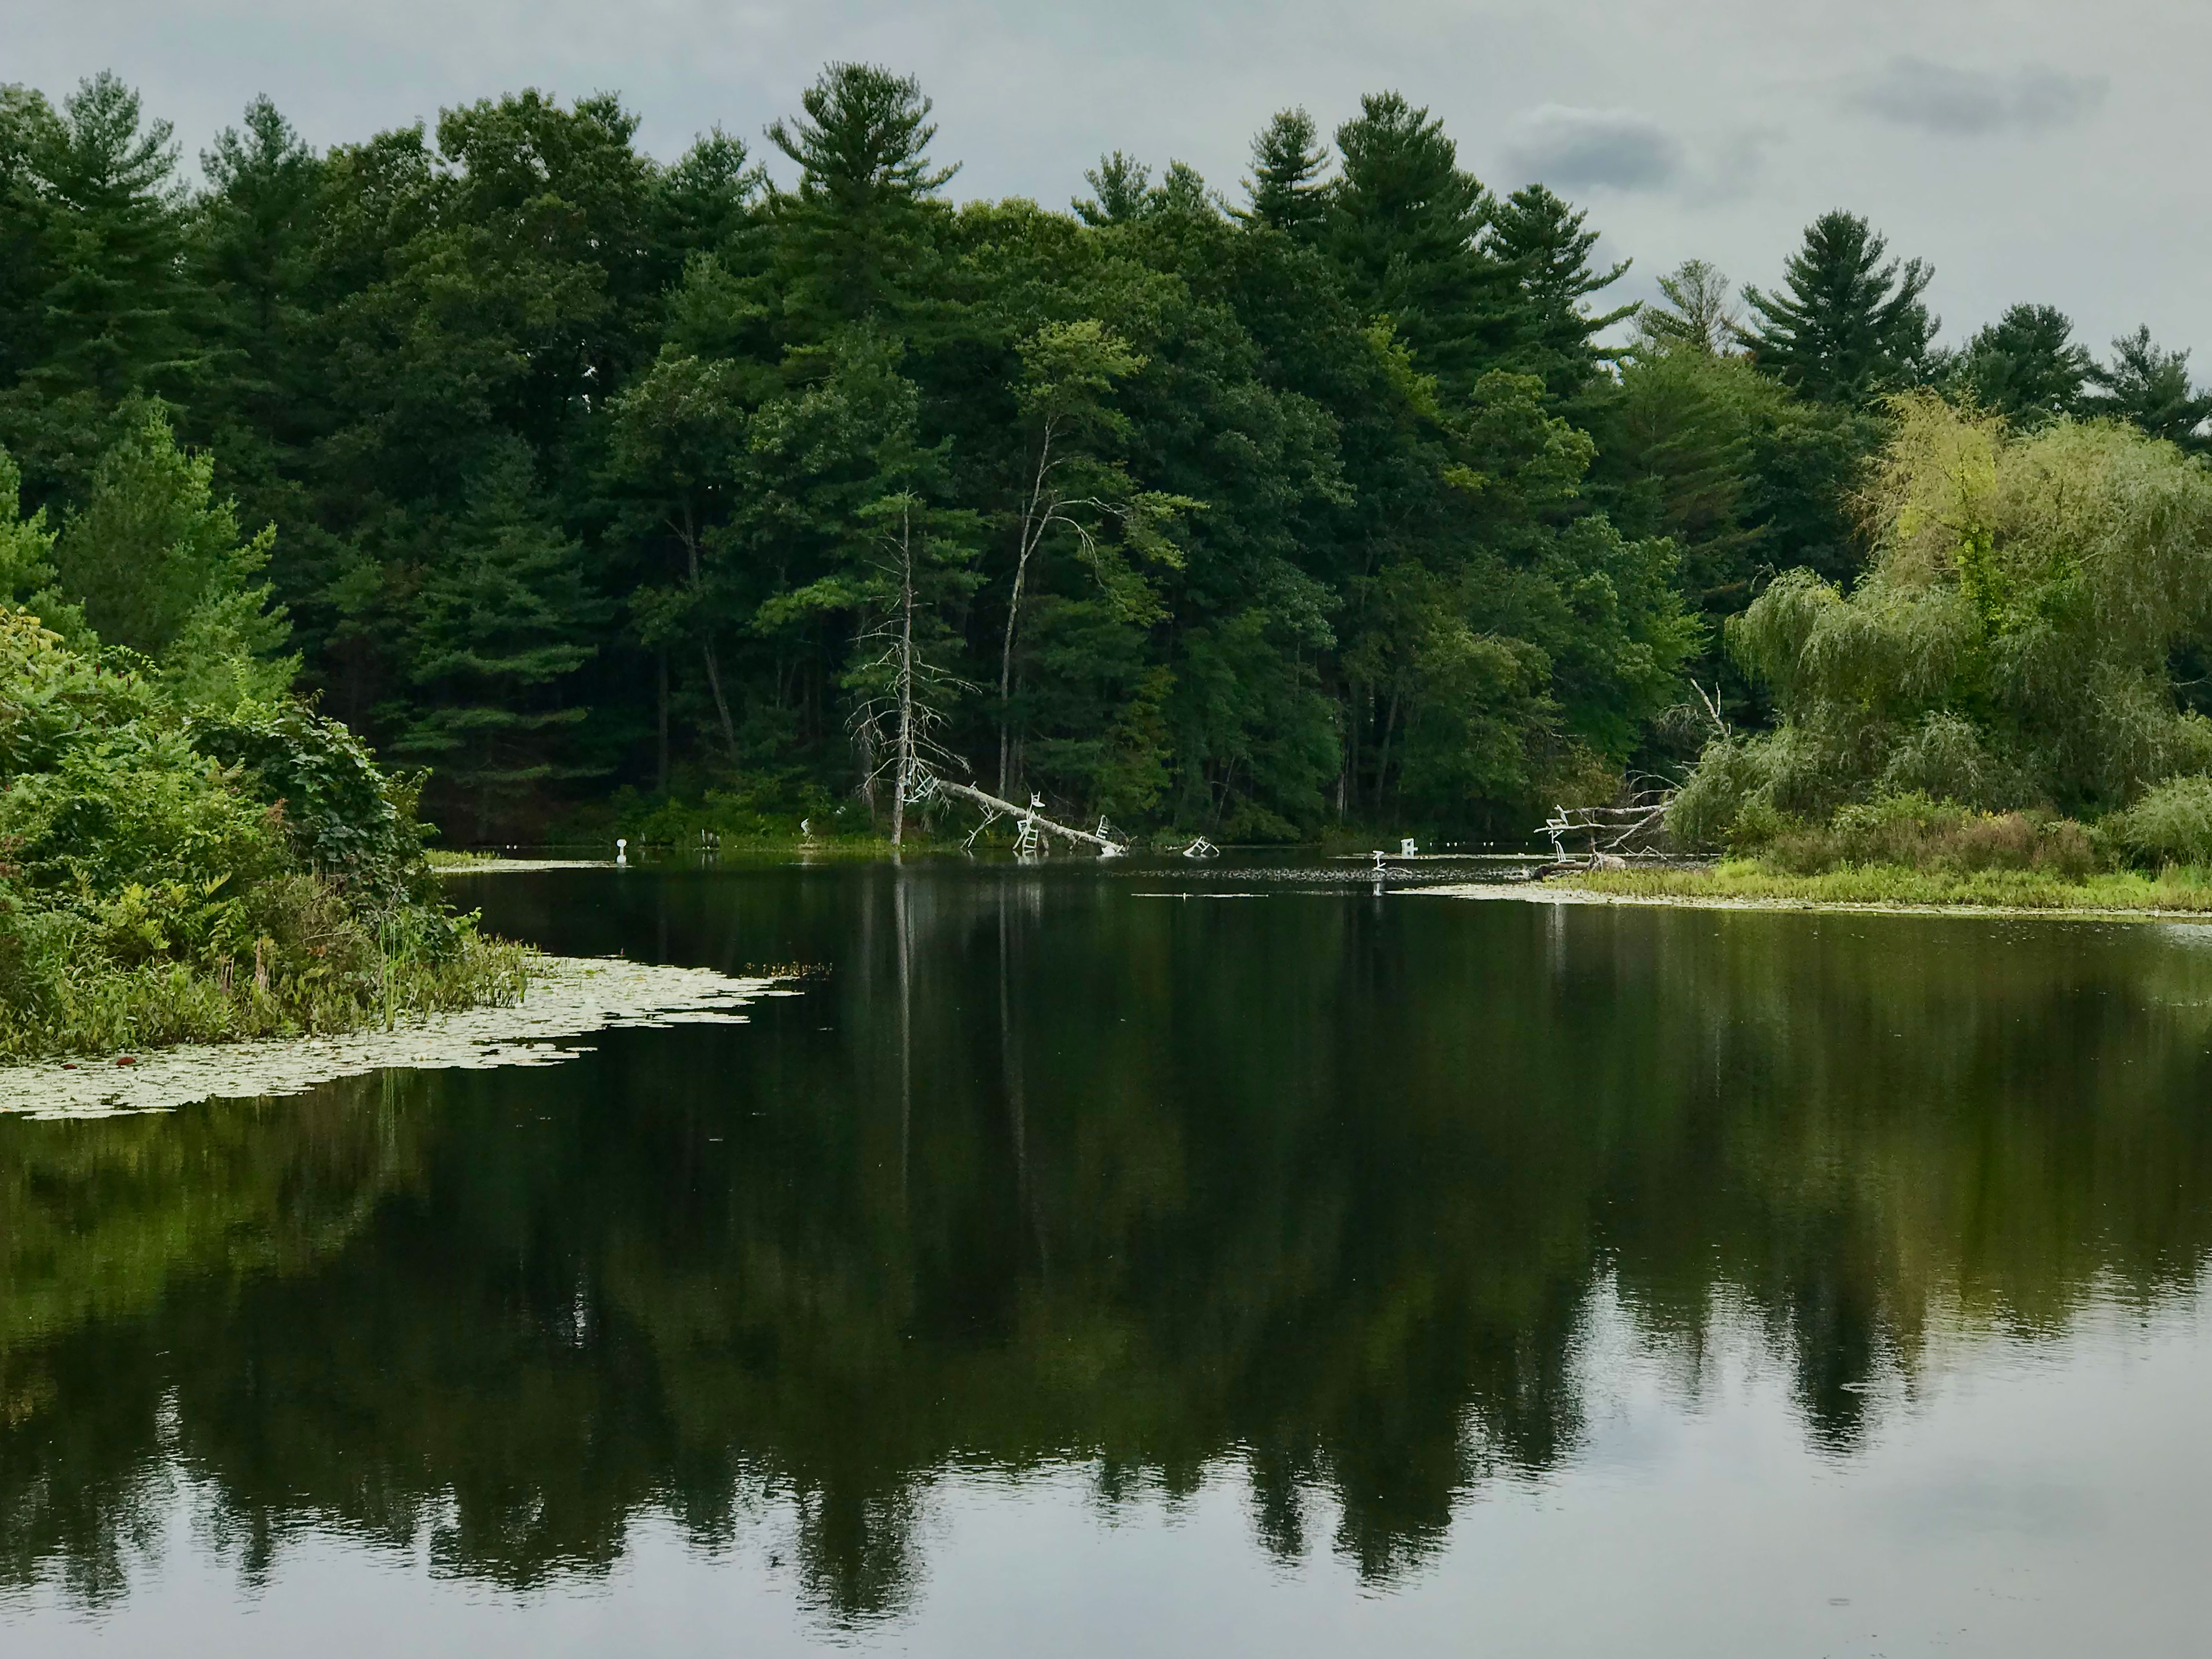 Photograph documenting 'Metamorphic Reflections' by artist Caroline Coolidge. A landscape features a vast, dark pond shimmering under the sunlight, surrounded by green trees. In the distant corner of the pond, a sculptural installation shows white-painted chairs and wooden objects suspended from fallen tree branches.